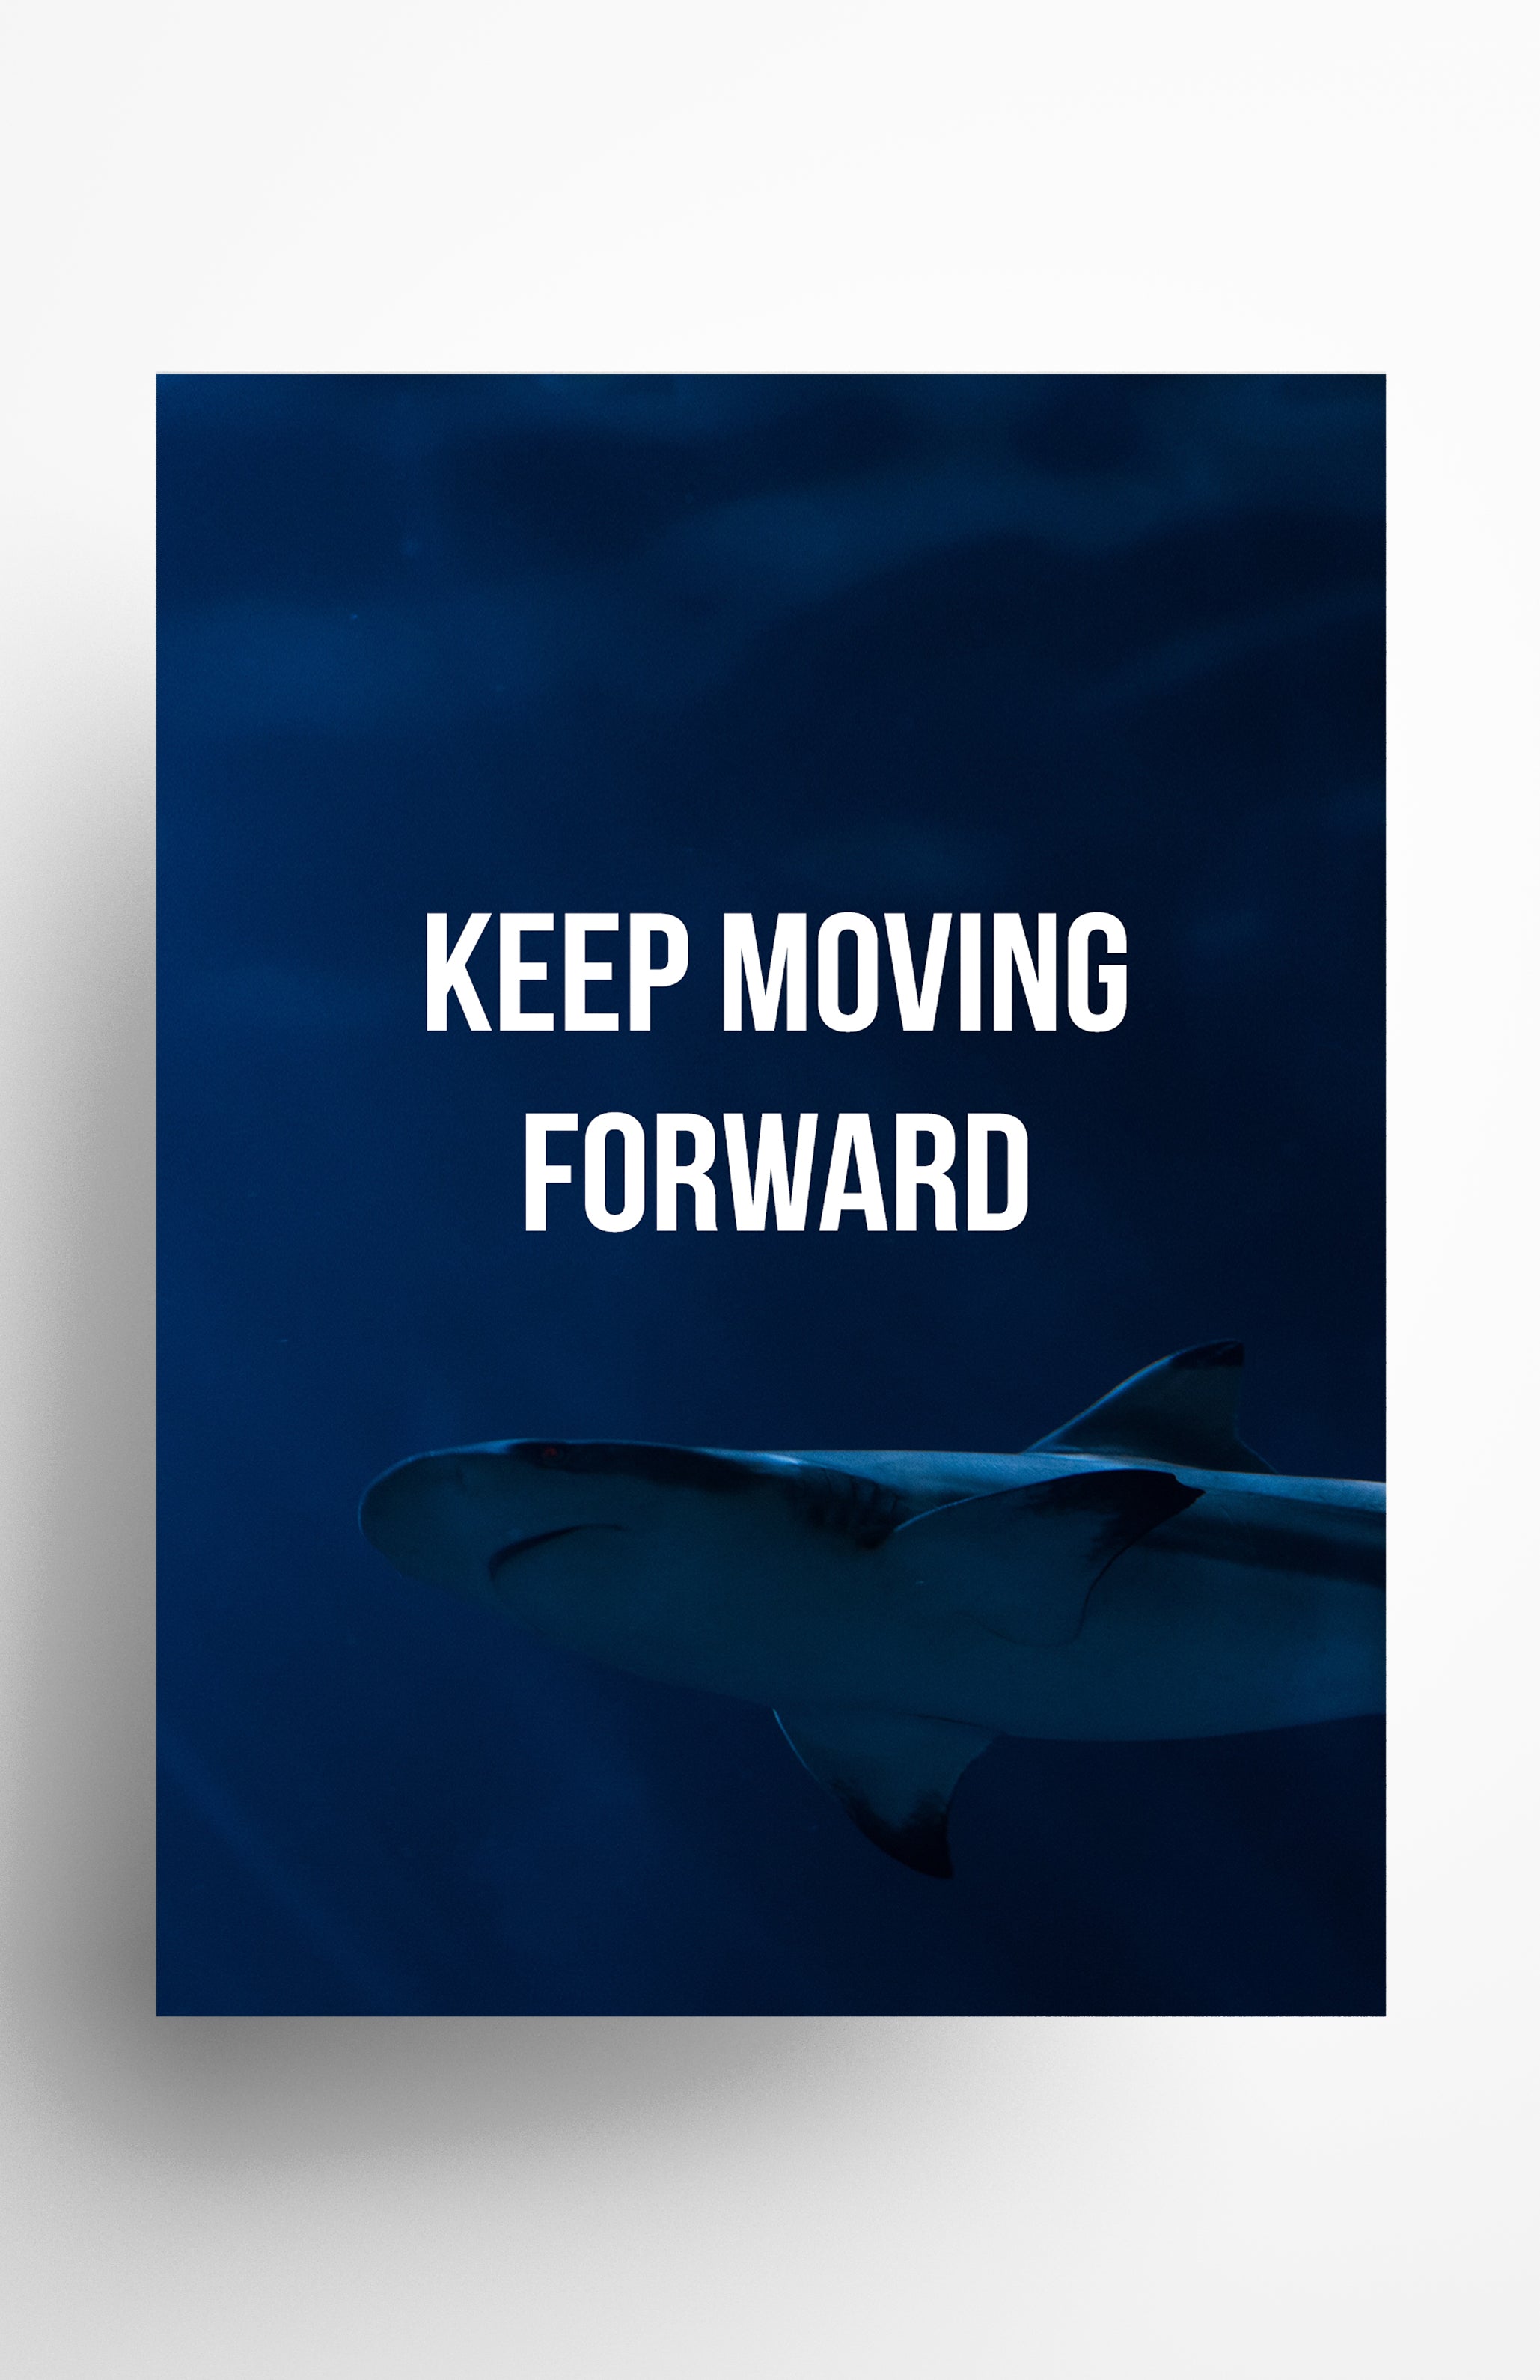 V3 Apparel womens keep moving forward, Motivational posters, mens inspirational wall artwork and empowering poster quote designs for office, home gym, school, kitchen and living room.